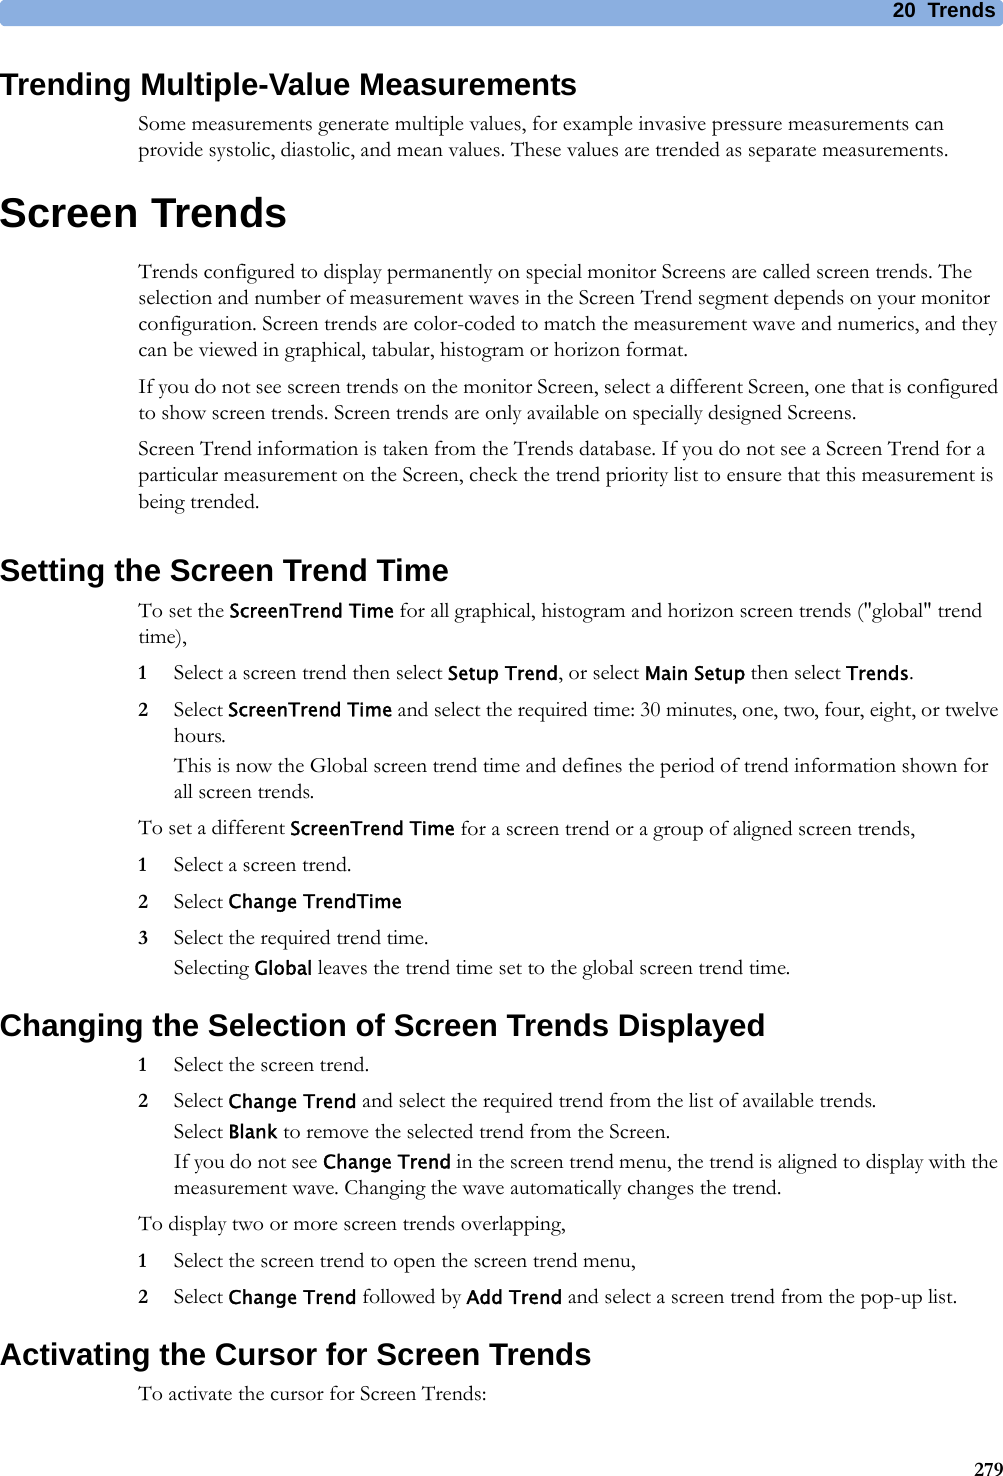 20 Trends279Trending Multiple-Value MeasurementsSome measurements generate multiple values, for example invasive pressure measurements can provide systolic, diastolic, and mean values. These values are trended as separate measurements.Screen TrendsTrends configured to display permanently on special monitor Screens are called screen trends. The selection and number of measurement waves in the Screen Trend segment depends on your monitor configuration. Screen trends are color-coded to match the measurement wave and numerics, and they can be viewed in graphical, tabular, histogram or horizon format.If you do not see screen trends on the monitor Screen, select a different Screen, one that is configured to show screen trends. Screen trends are only available on specially designed Screens.Screen Trend information is taken from the Trends database. If you do not see a Screen Trend for a particular measurement on the Screen, check the trend priority list to ensure that this measurement is being trended.Setting the Screen Trend TimeTo set the ScreenTrend Time for all graphical, histogram and horizon screen trends (&quot;global&quot; trend time),1Select a screen trend then select Setup Trend, or select Main Setup then select Trends.2Select ScreenTrend Time and select the required time: 30 minutes, one, two, four, eight, or twelve hours.This is now the Global screen trend time and defines the period of trend information shown for all screen trends.To set a different ScreenTrend Time for a screen trend or a group of aligned screen trends,1Select a screen trend.2Select Change TrendTime3Select the required trend time.Selecting Global leaves the trend time set to the global screen trend time.Changing the Selection of Screen Trends Displayed1Select the screen trend.2Select Change Trend and select the required trend from the list of available trends.Select Blank to remove the selected trend from the Screen.If you do not see Change Trend in the screen trend menu, the trend is aligned to display with the measurement wave. Changing the wave automatically changes the trend.To display two or more screen trends overlapping,1Select the screen trend to open the screen trend menu,2Select Change Trend followed by Add Trend and select a screen trend from the pop-up list.Activating the Cursor for Screen TrendsTo activate the cursor for Screen Trends: